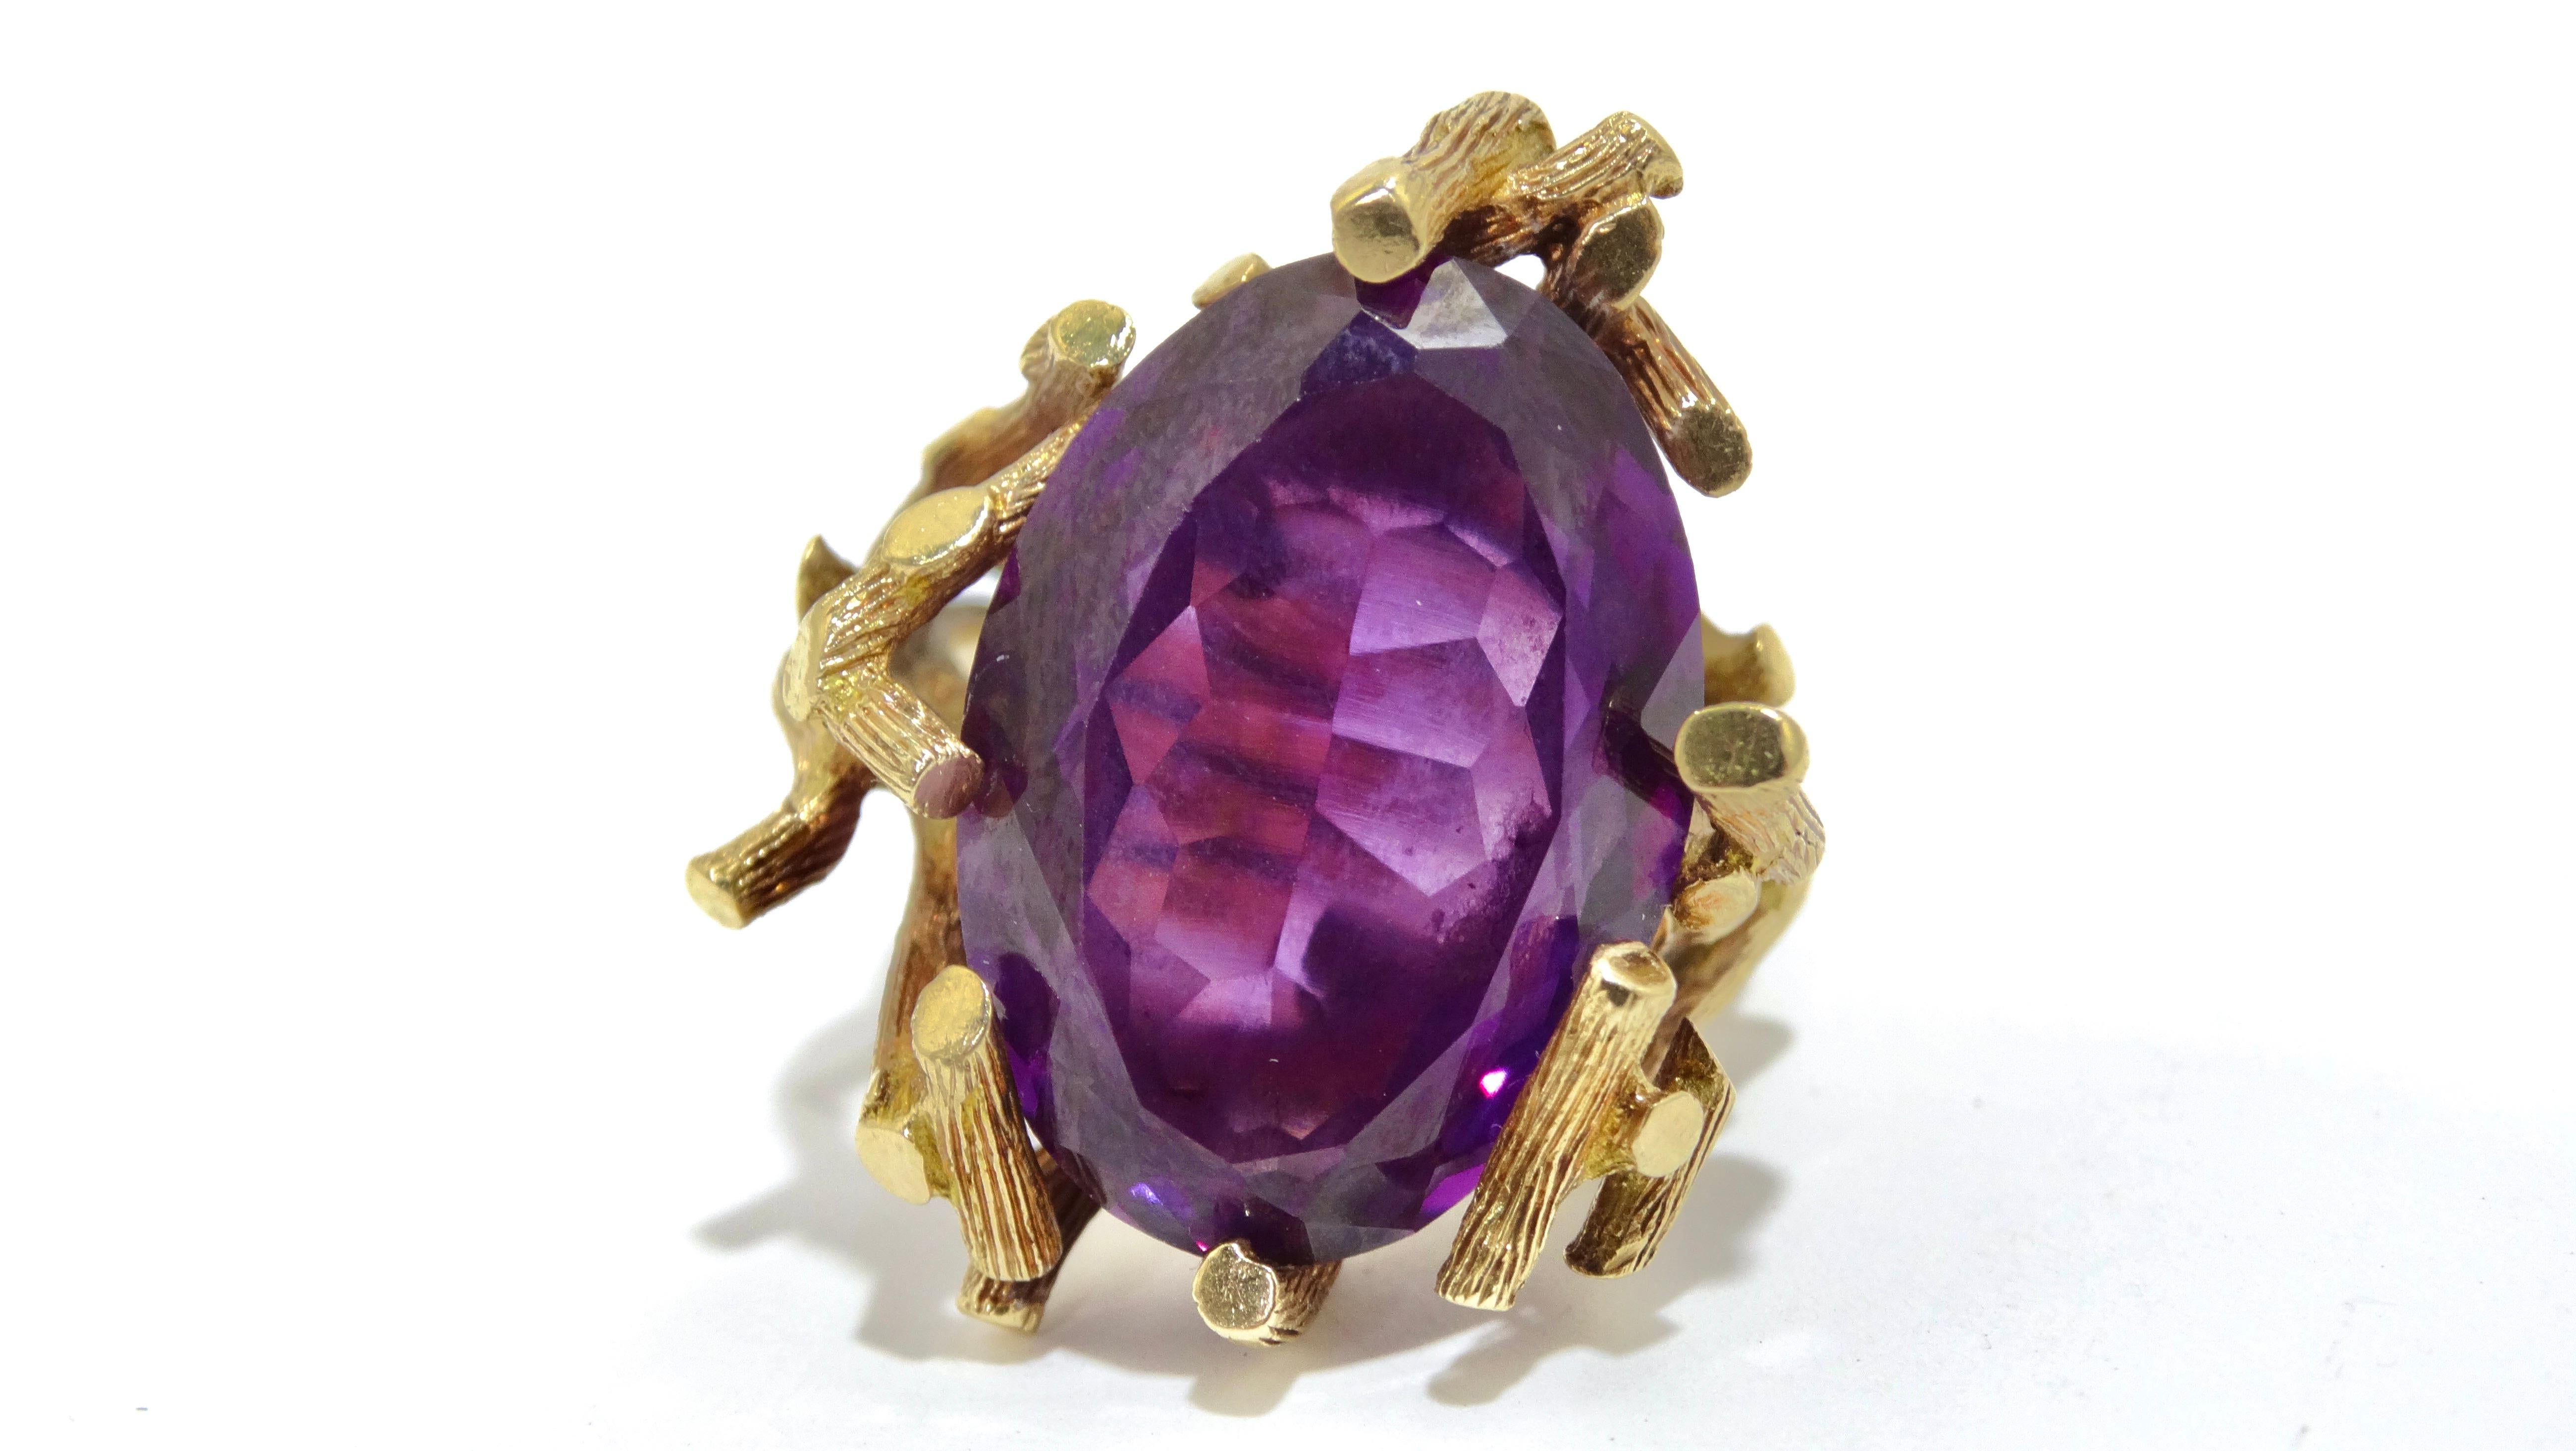 Don't miss your chance to get your hands on this massive Amethyst stone. Notice the amazing details like the intricate tree-branch detailing in 14k gold. Wear this ring with more vibrant color with a Diane Freis maxi dress. 


Weight: 14.44g
Size: